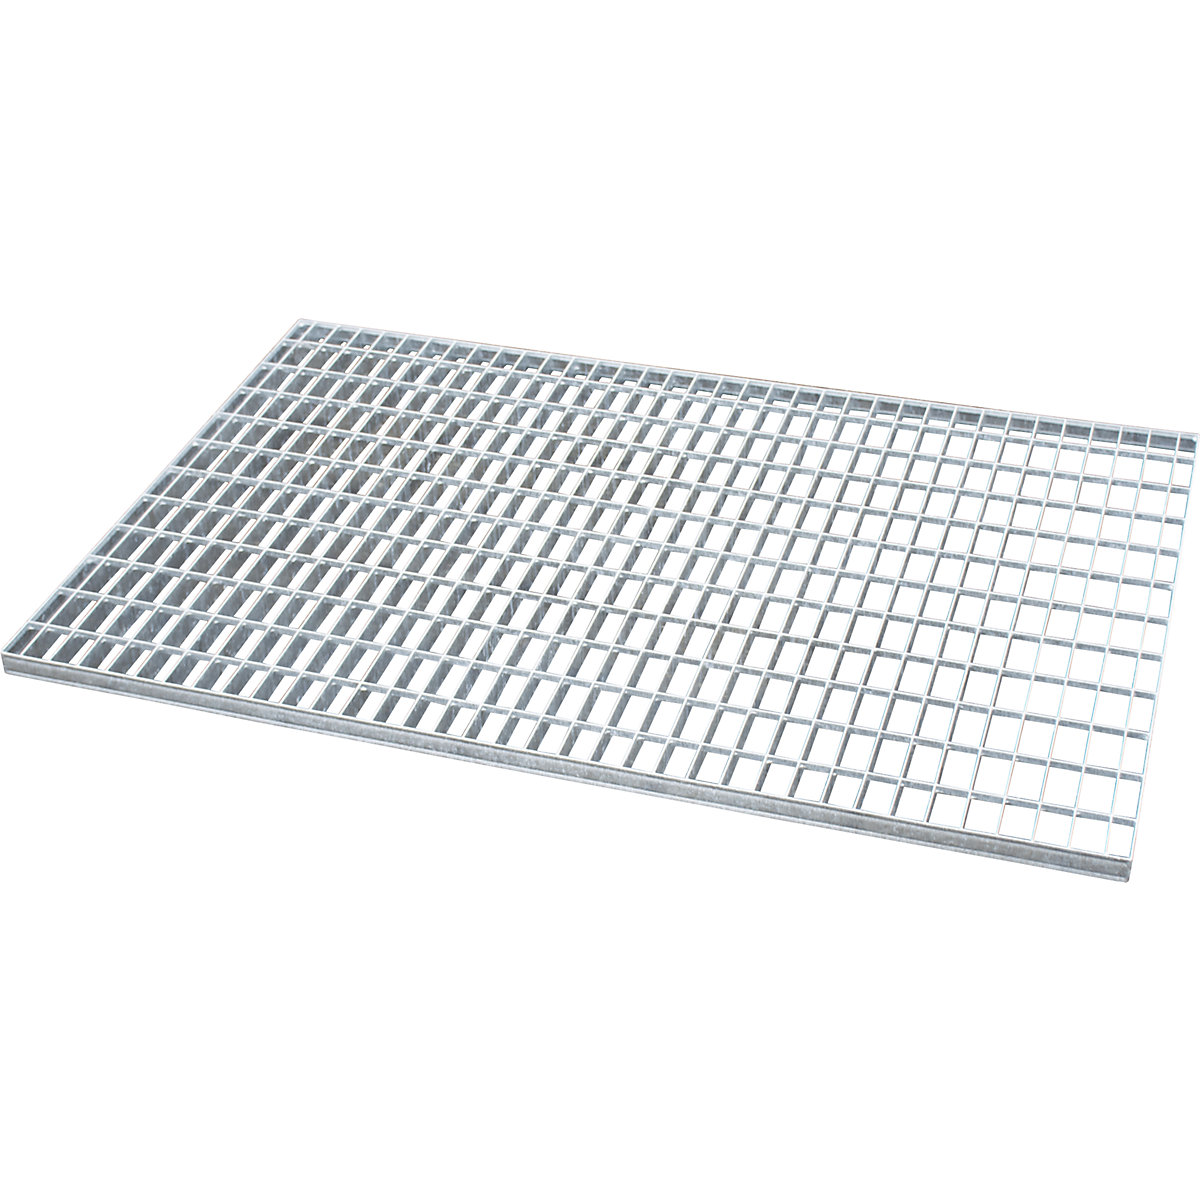 Grate – eurokraft pro, for sump trays for 200 l drums, zinc plated, LxWxH 1200 x 800 x 360 mm-3